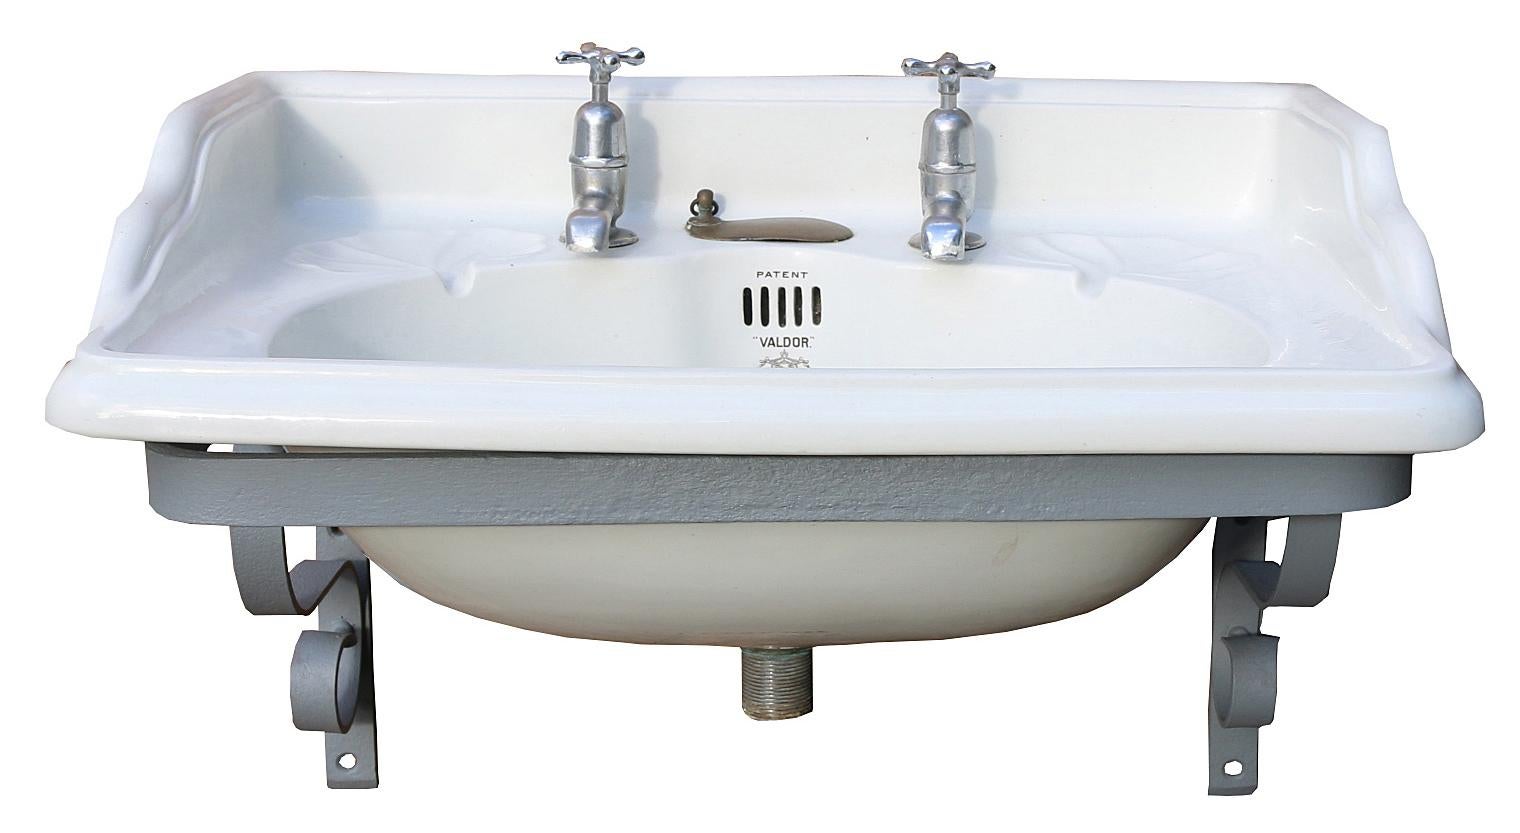 This basin is a ‘Valdor’ model by John Bolding and comes with an Iron wall mounting bracket. The taps are not original and have not been tested. The Iron Bracket has been sandblasted and finished in primer.